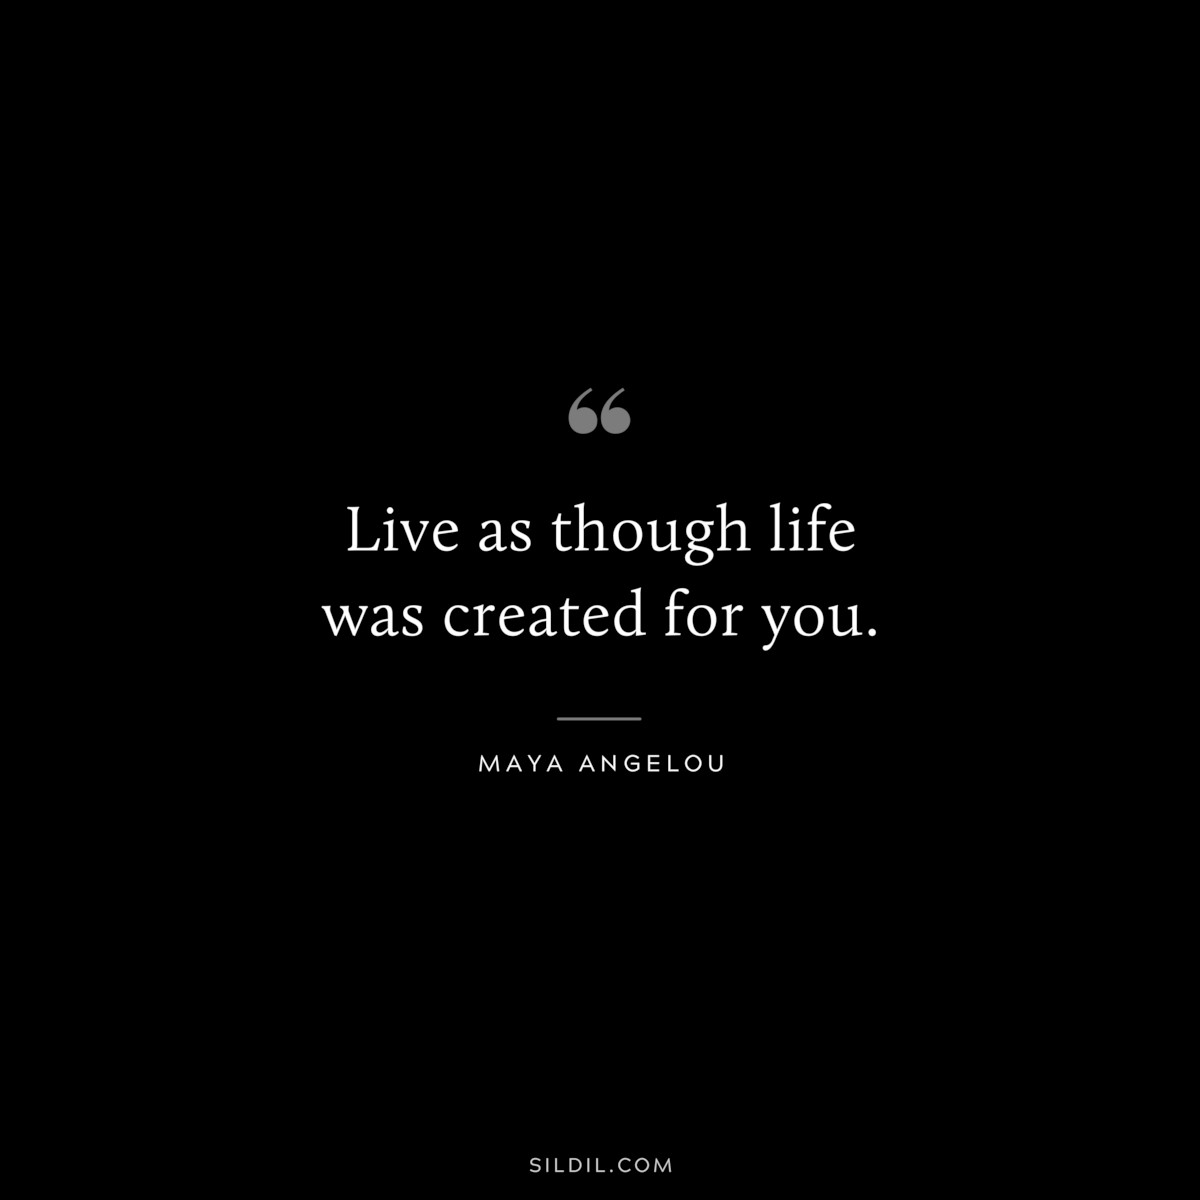 Live as though life was created for you. ― Maya Angelou